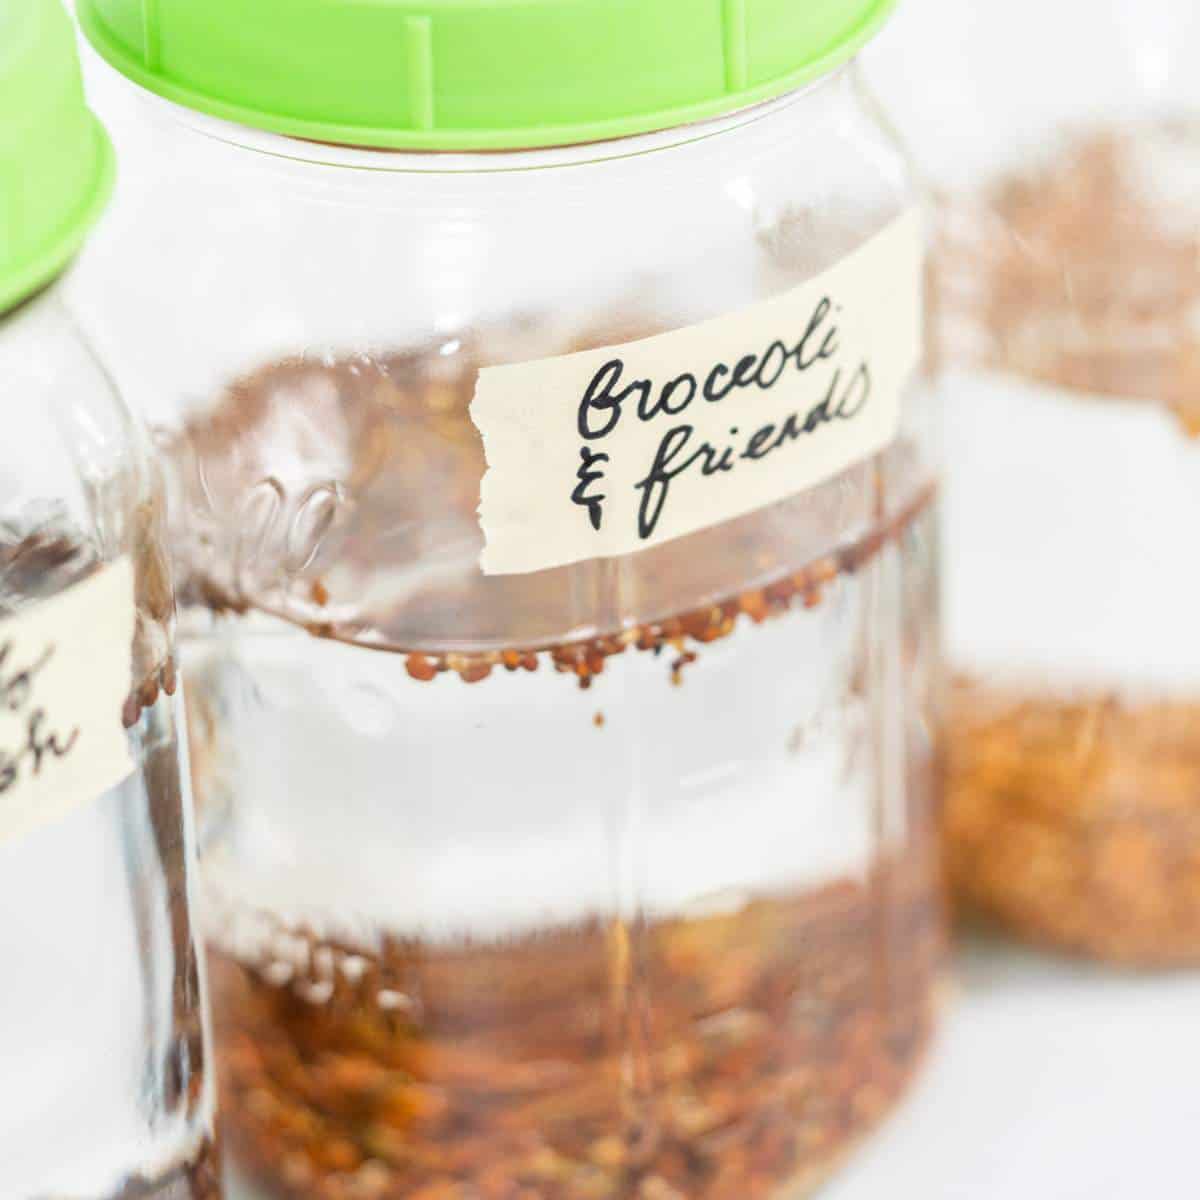 A group of jars with brown liquid and green caps are ideal for storing sprouts in water.